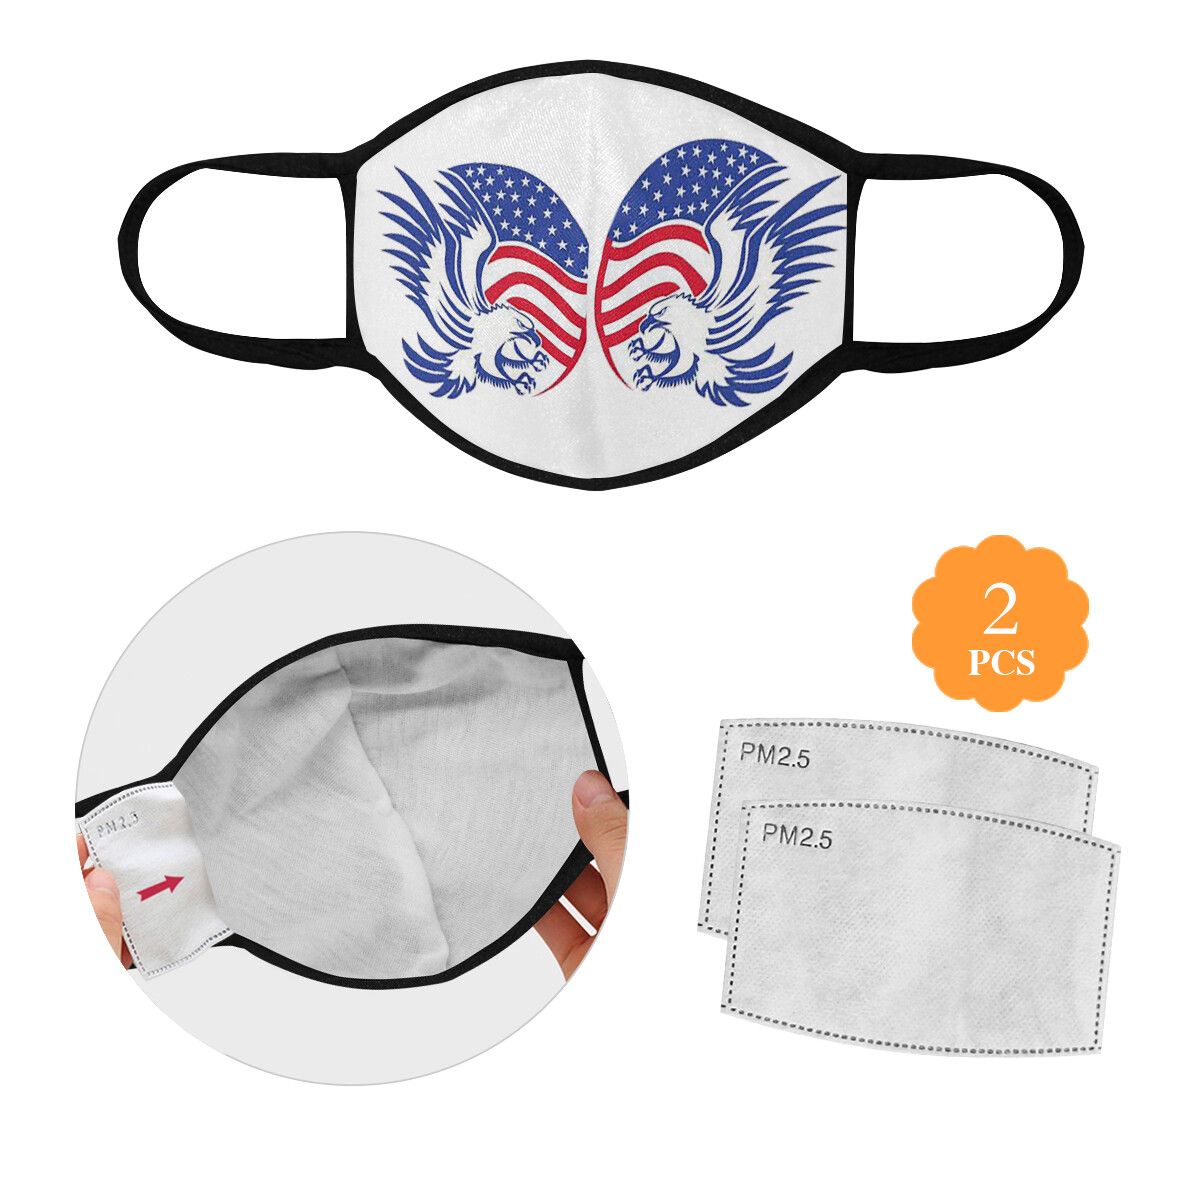 👸🏽🤴🏽4th of July Soft Breathable Fabric Reusable w/ 2 PM 2.5 Filters 3 sizes S M L Adults and Kids matching masks Pack 1 to 1000 units 2 eagles